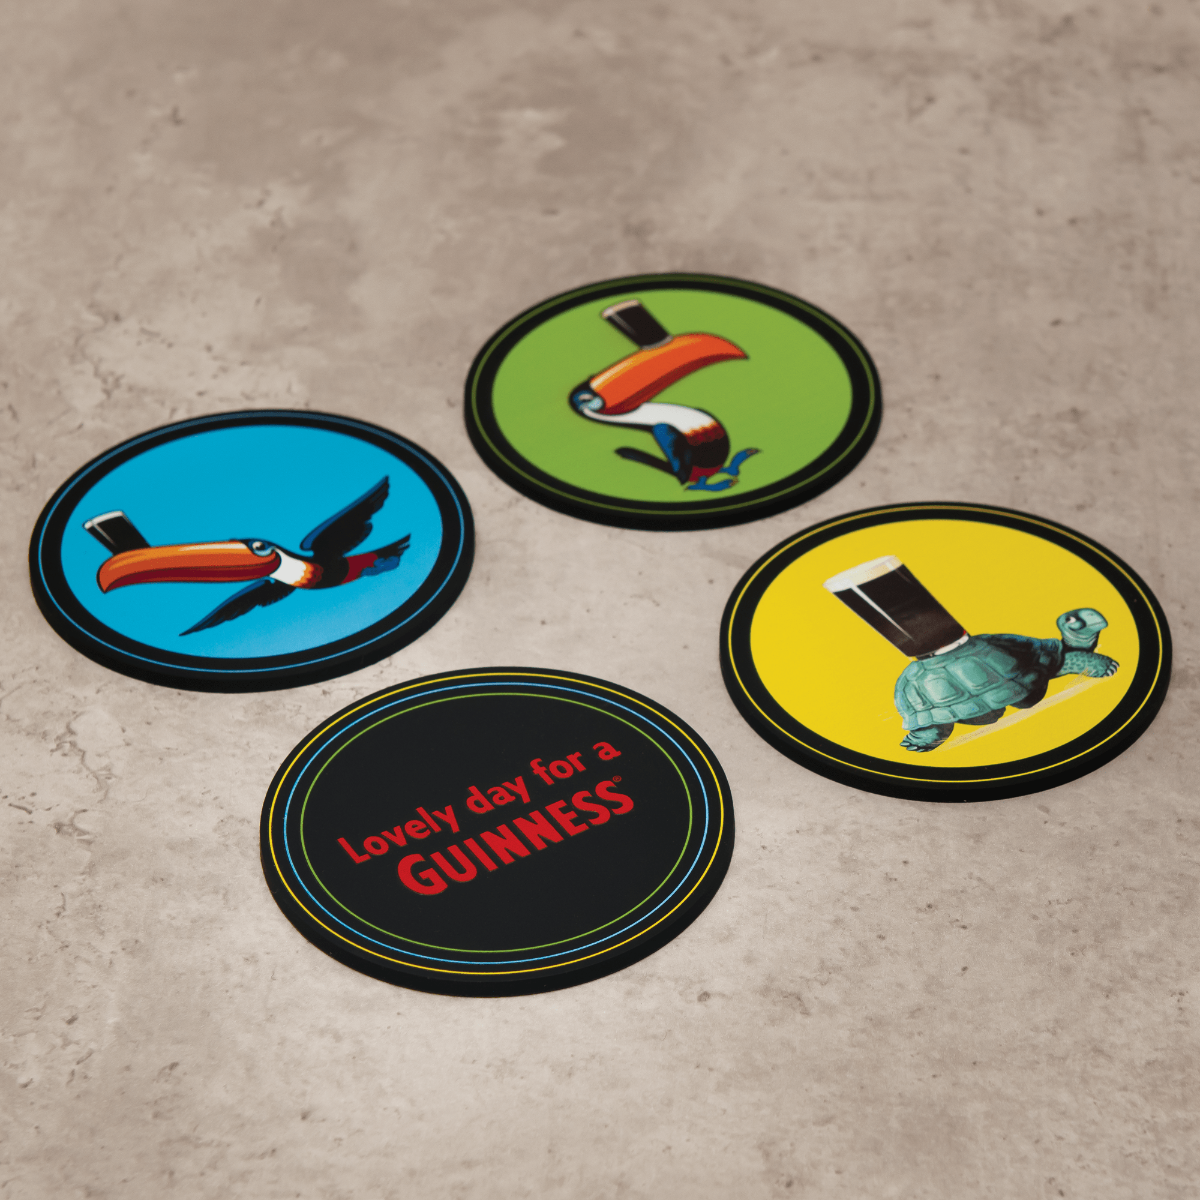 Set of 4 Guinness Ultimate Toucan Home Bar Pack coasters, perfect Guinness bar gift or merchandise.